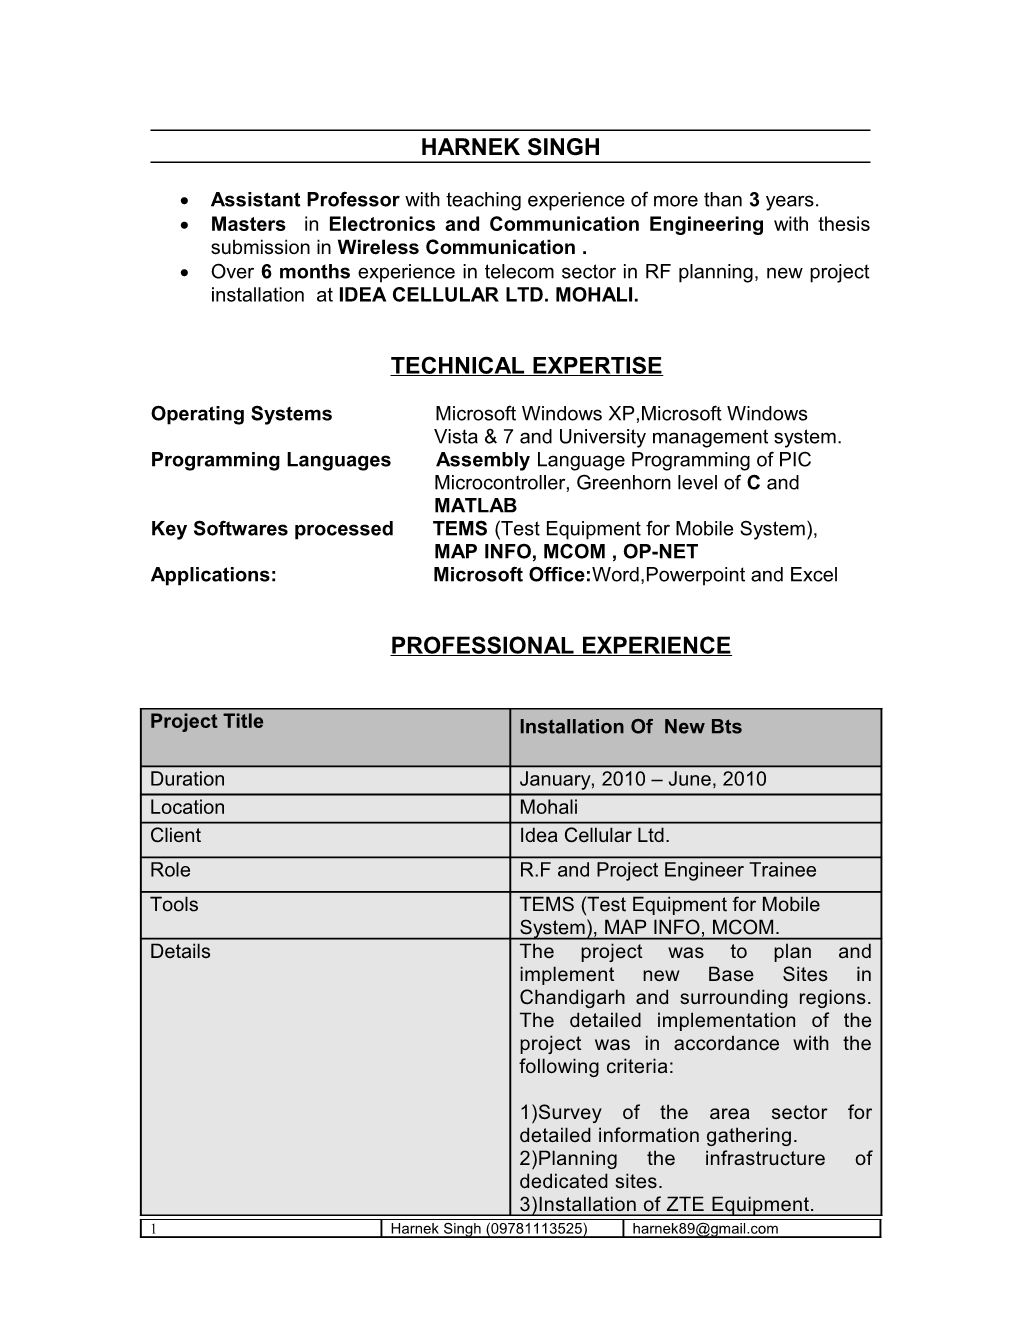 Assistant Professor with Teaching Experience of More Than 3 Years